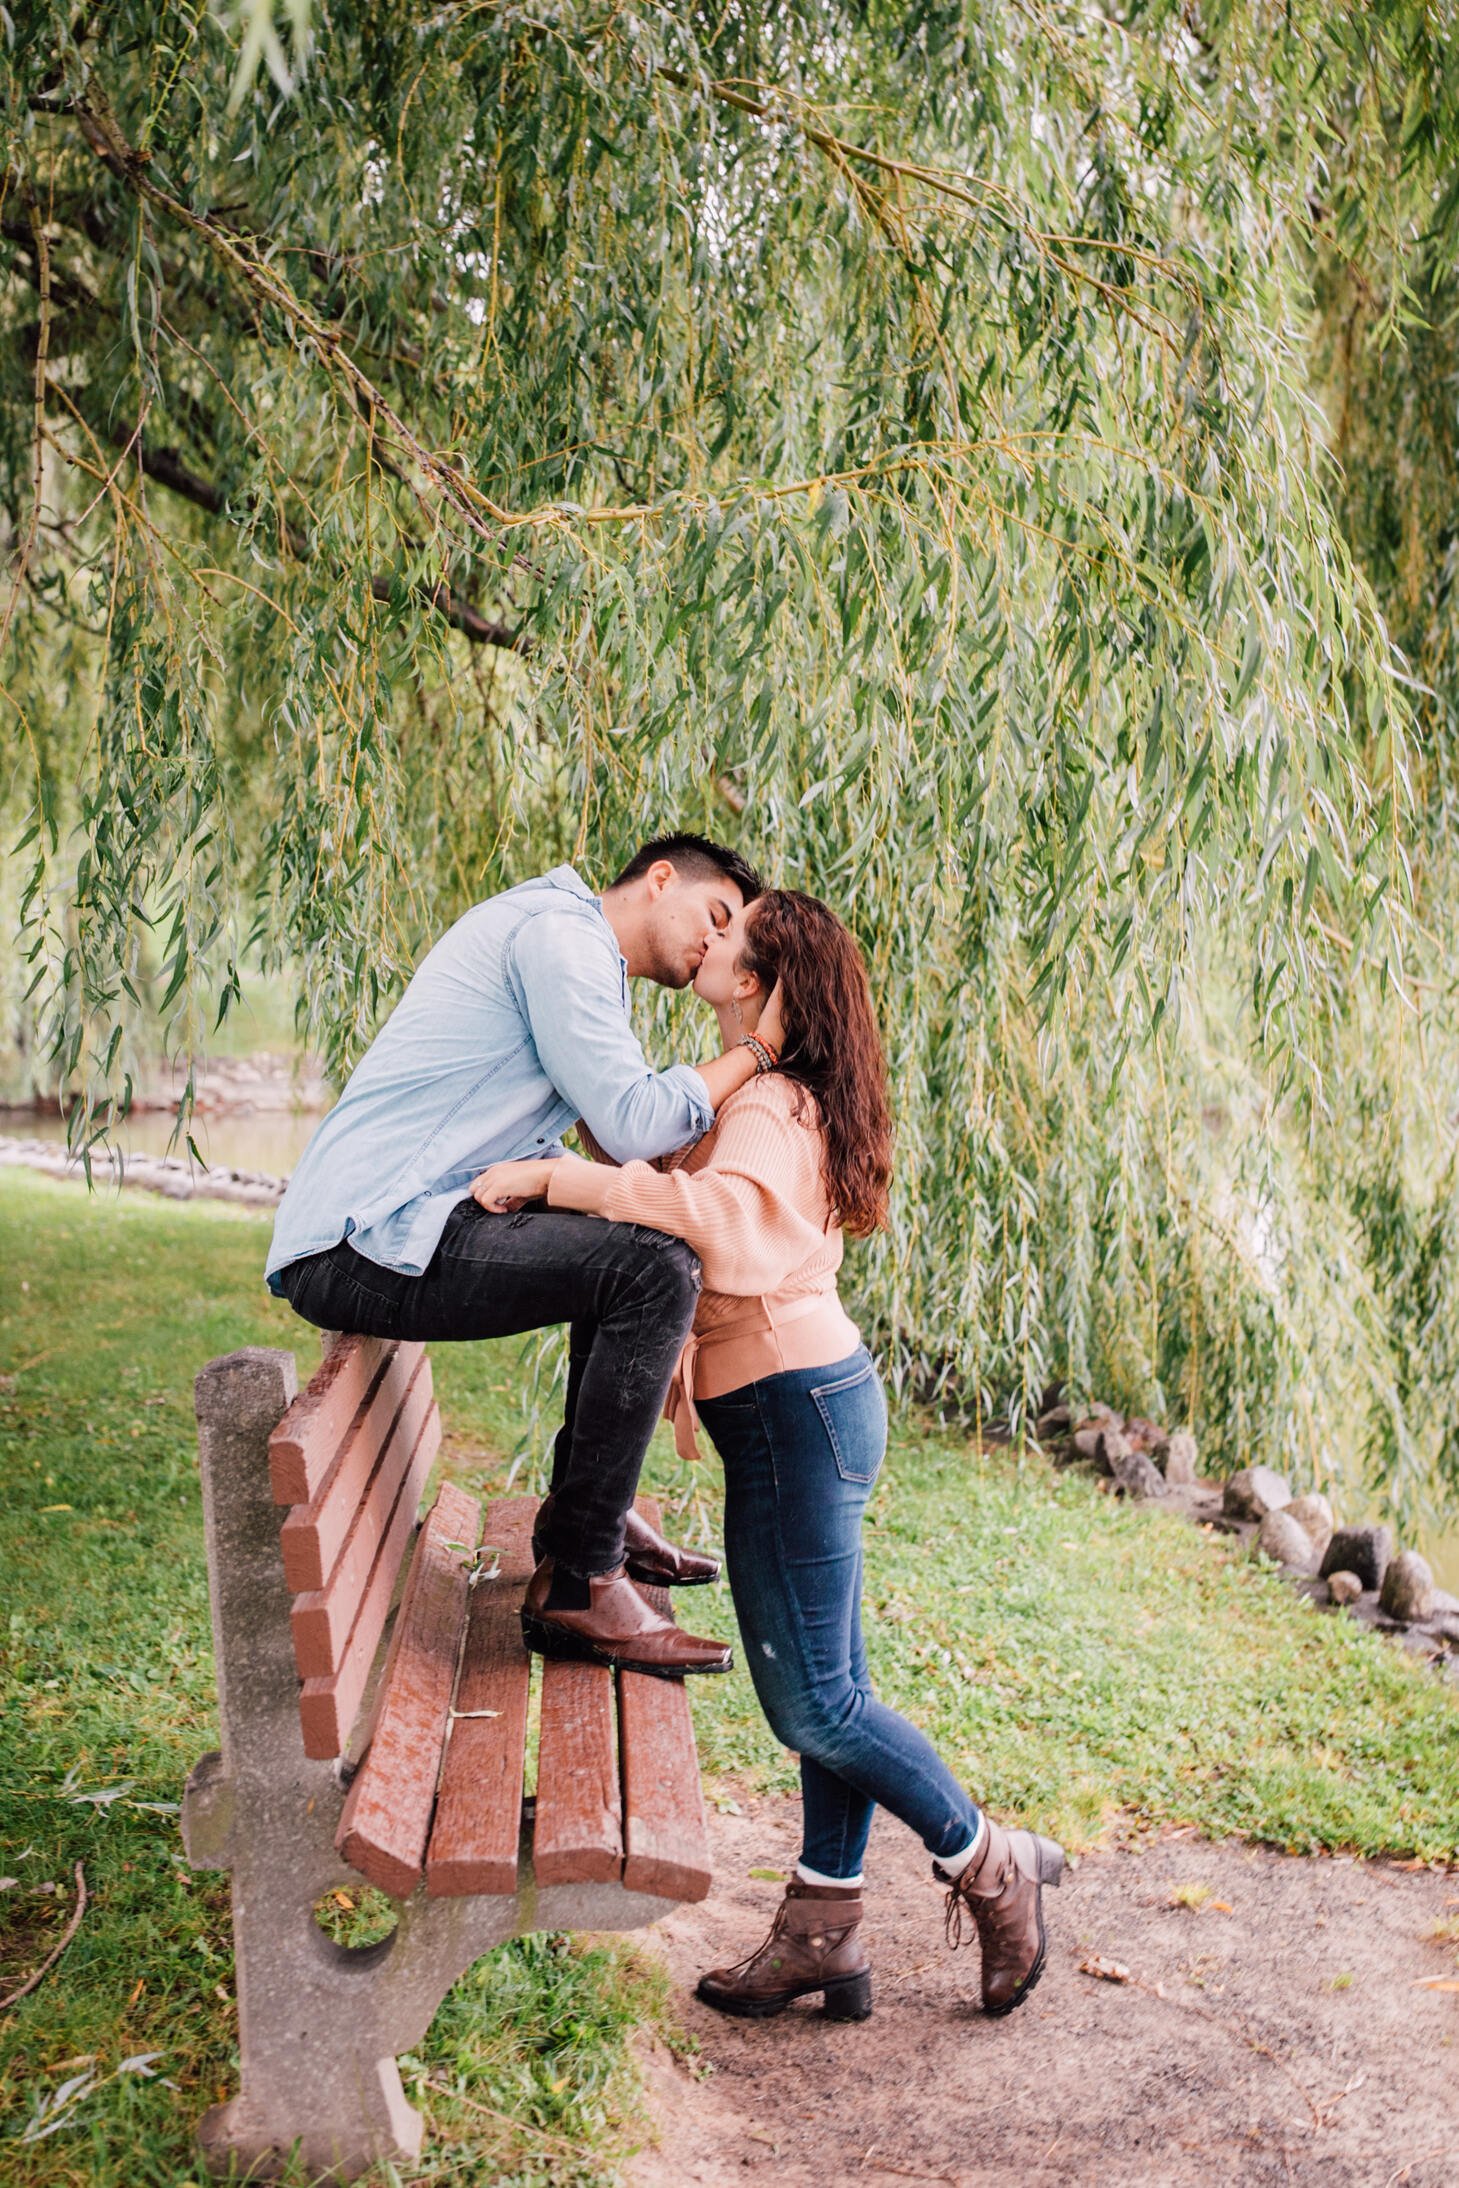  jessica and pablo share a kiss on a park bench under a willow tree during their rainy engagement photos 